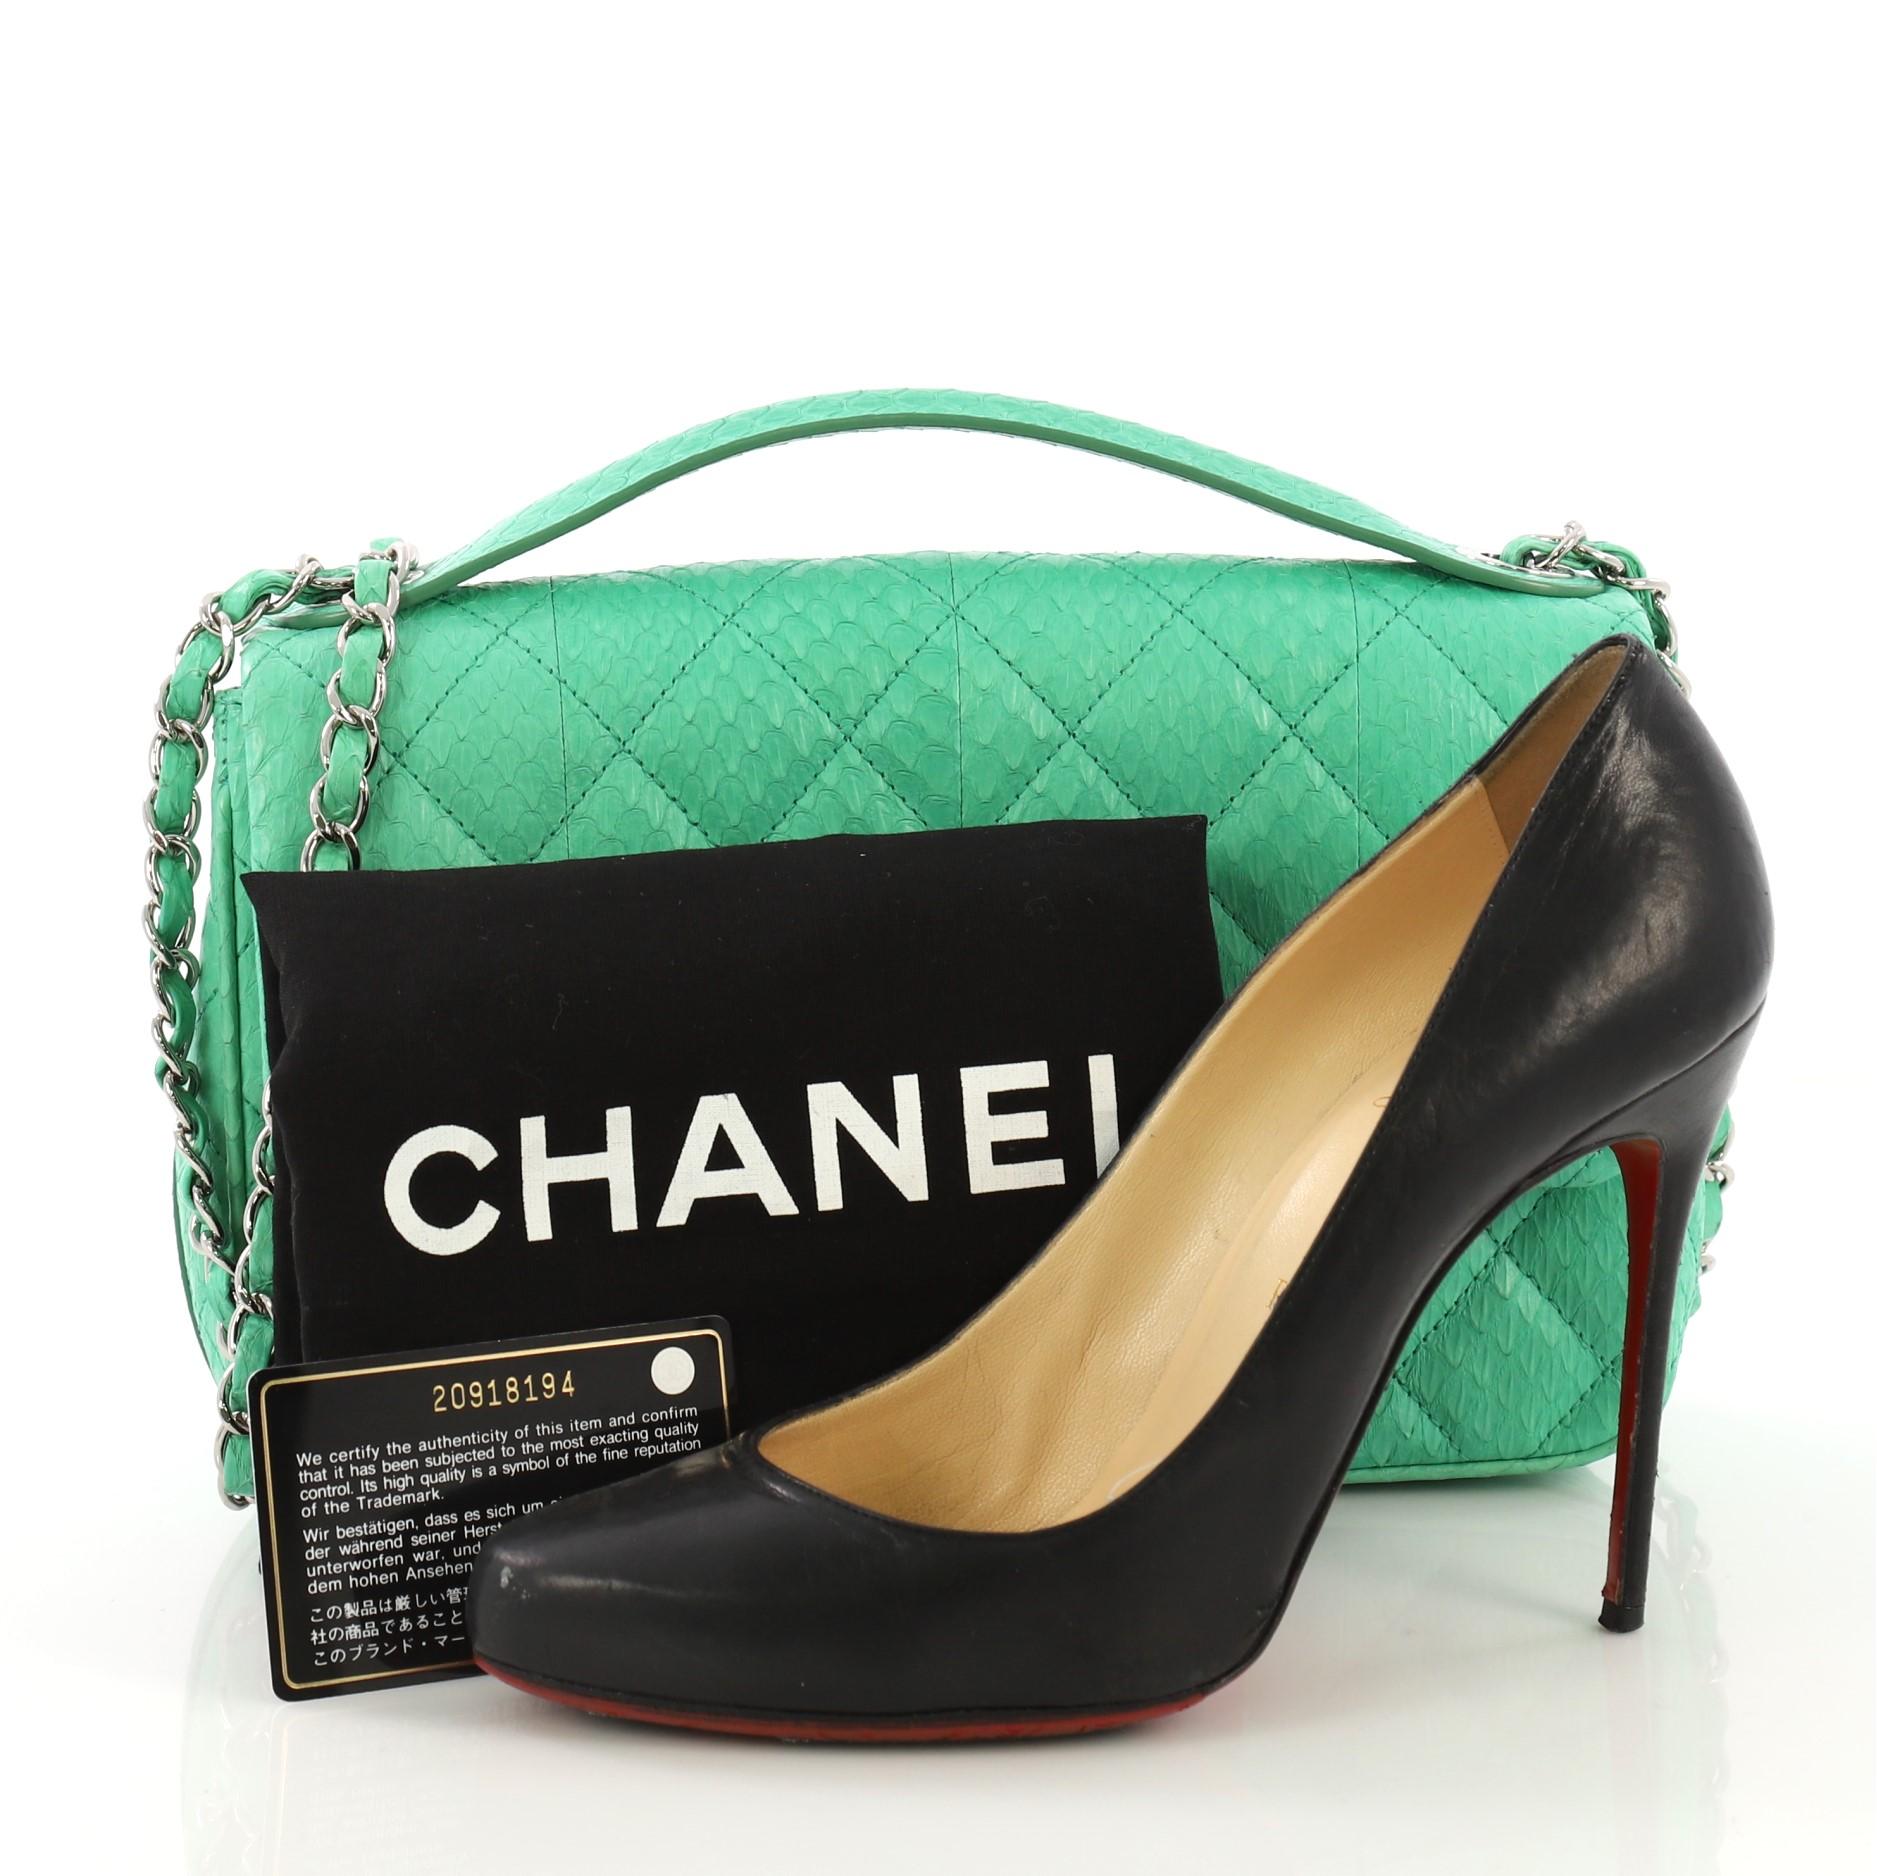 This Chanel Easy Carry Flap Bag Quilted Snakeskin Medium, crafted in a genuine green quilted snakeskin, features a flat top handle, woven-in leather chain strap, exterior back slip pocket and silver-tone hardware. Its CC turn-lock closure opens with